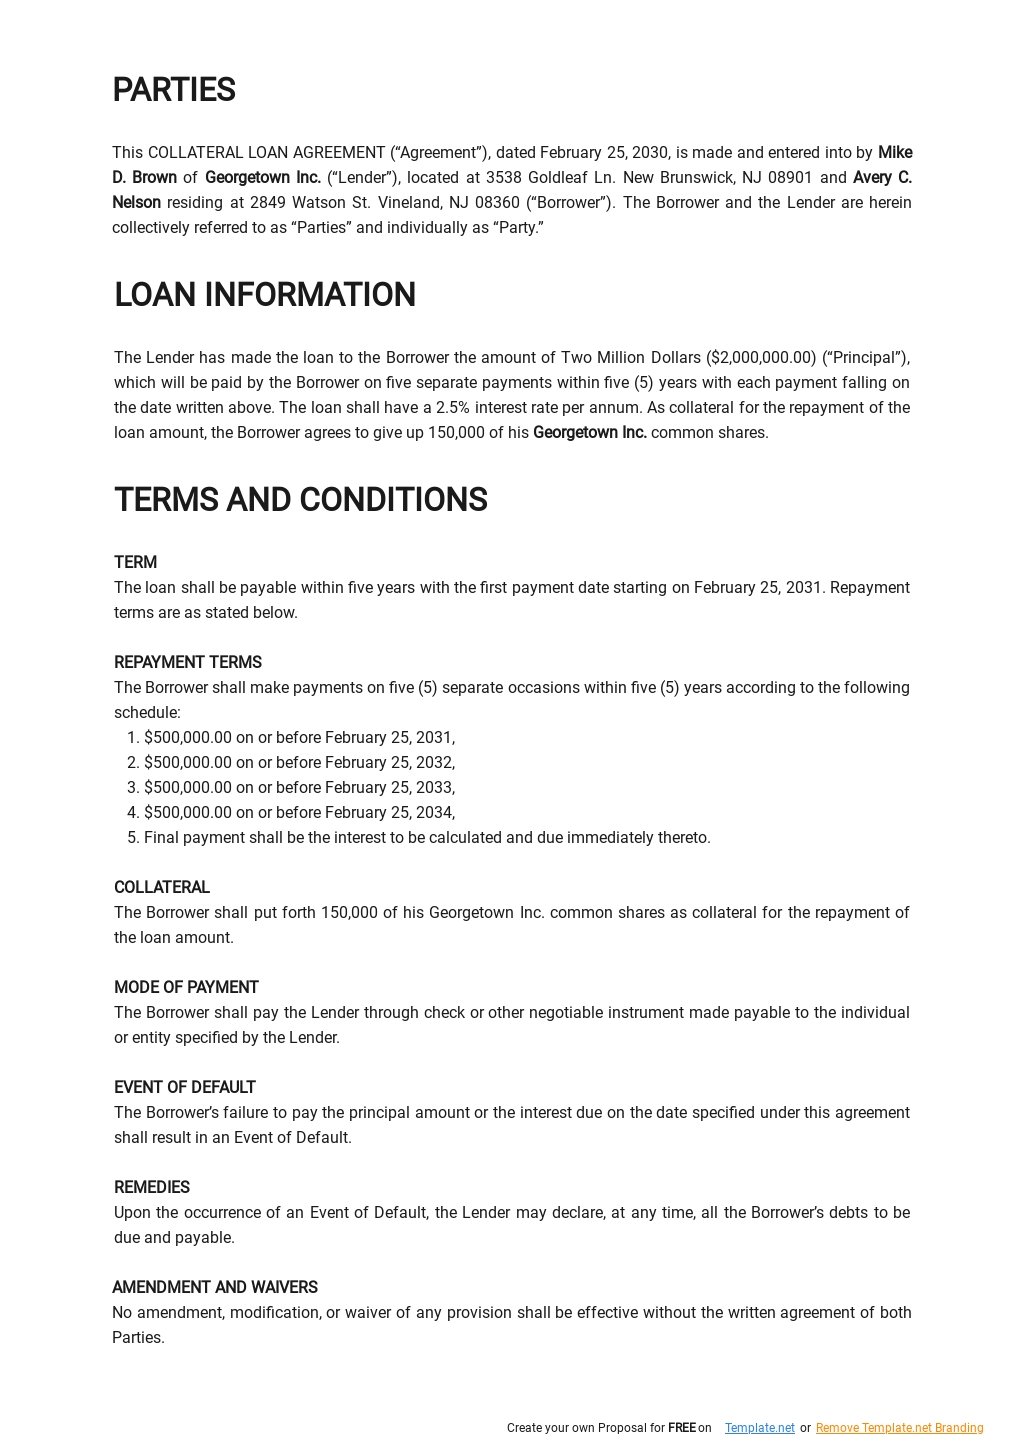 Simple Collateral Loan Agreement Template 1.jpe